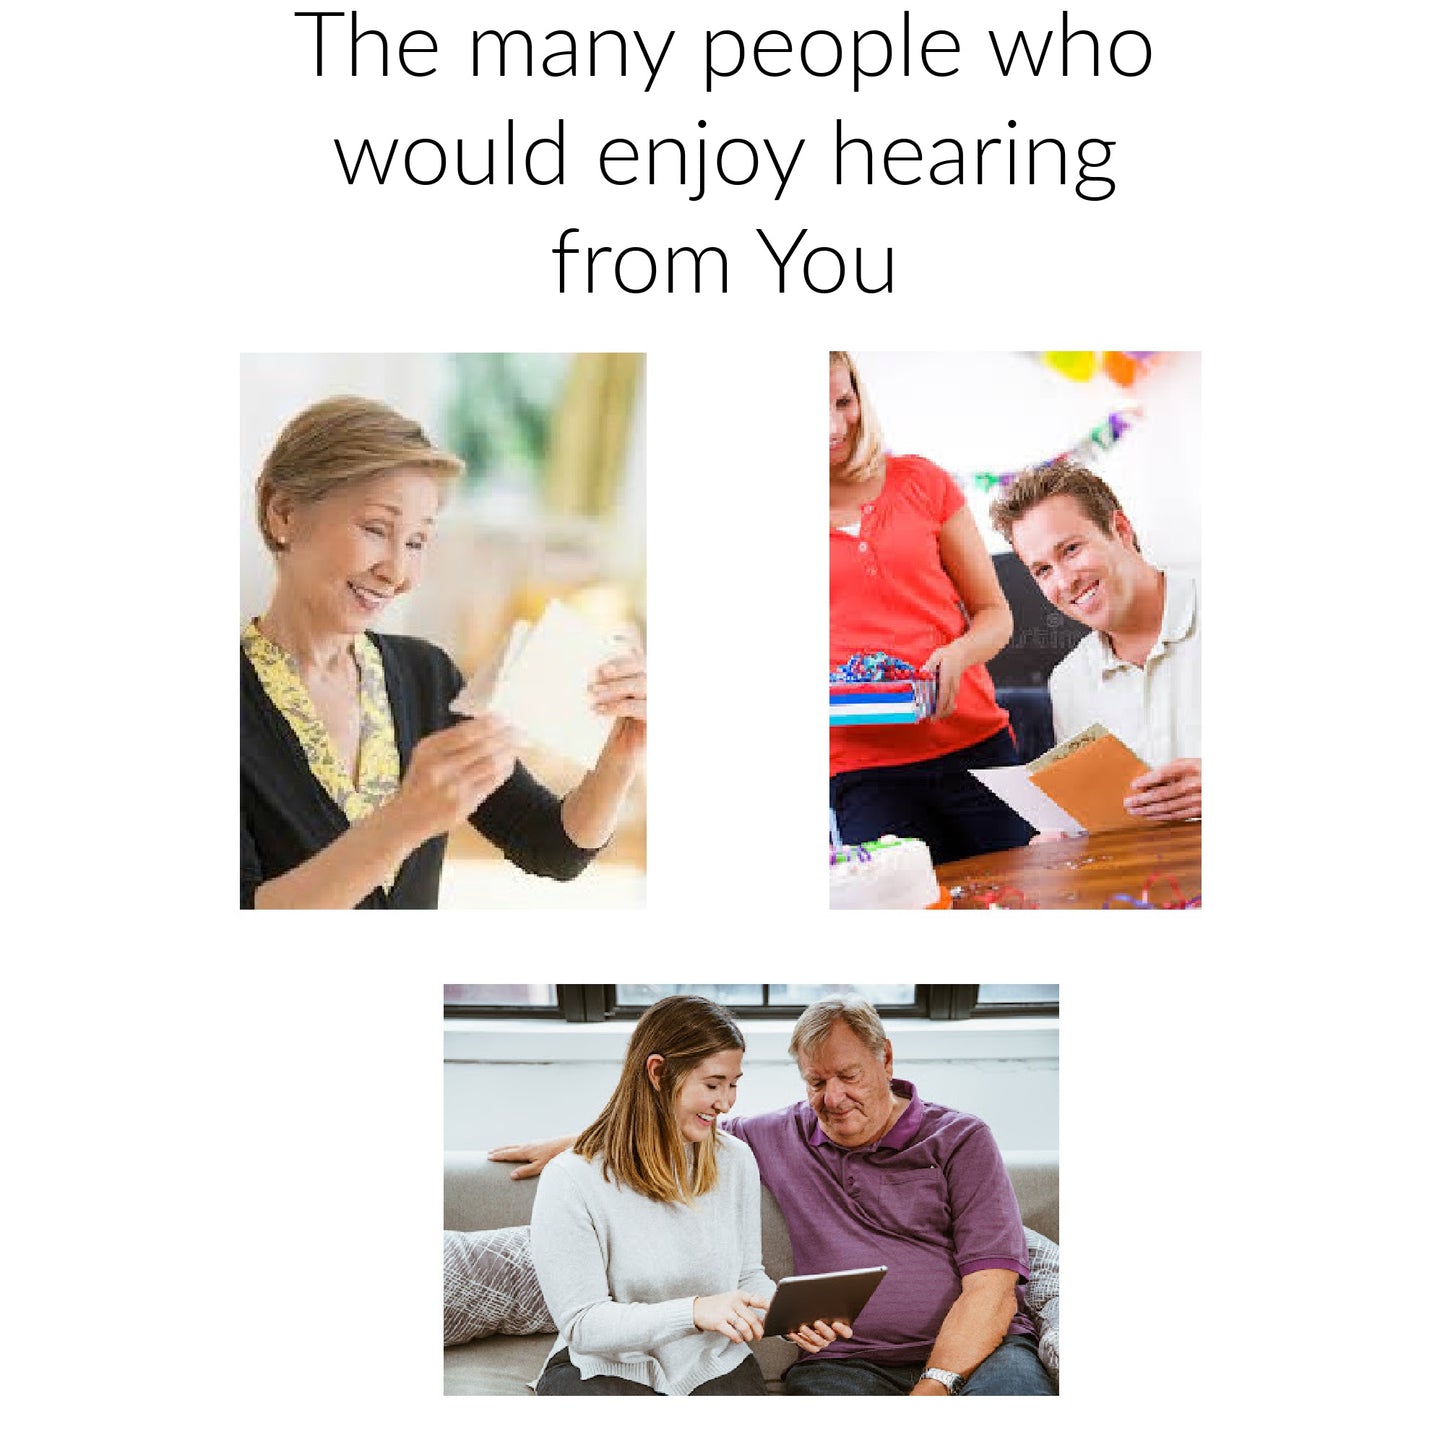 Photo of kinds of people who would enjoy receiving this card from you.